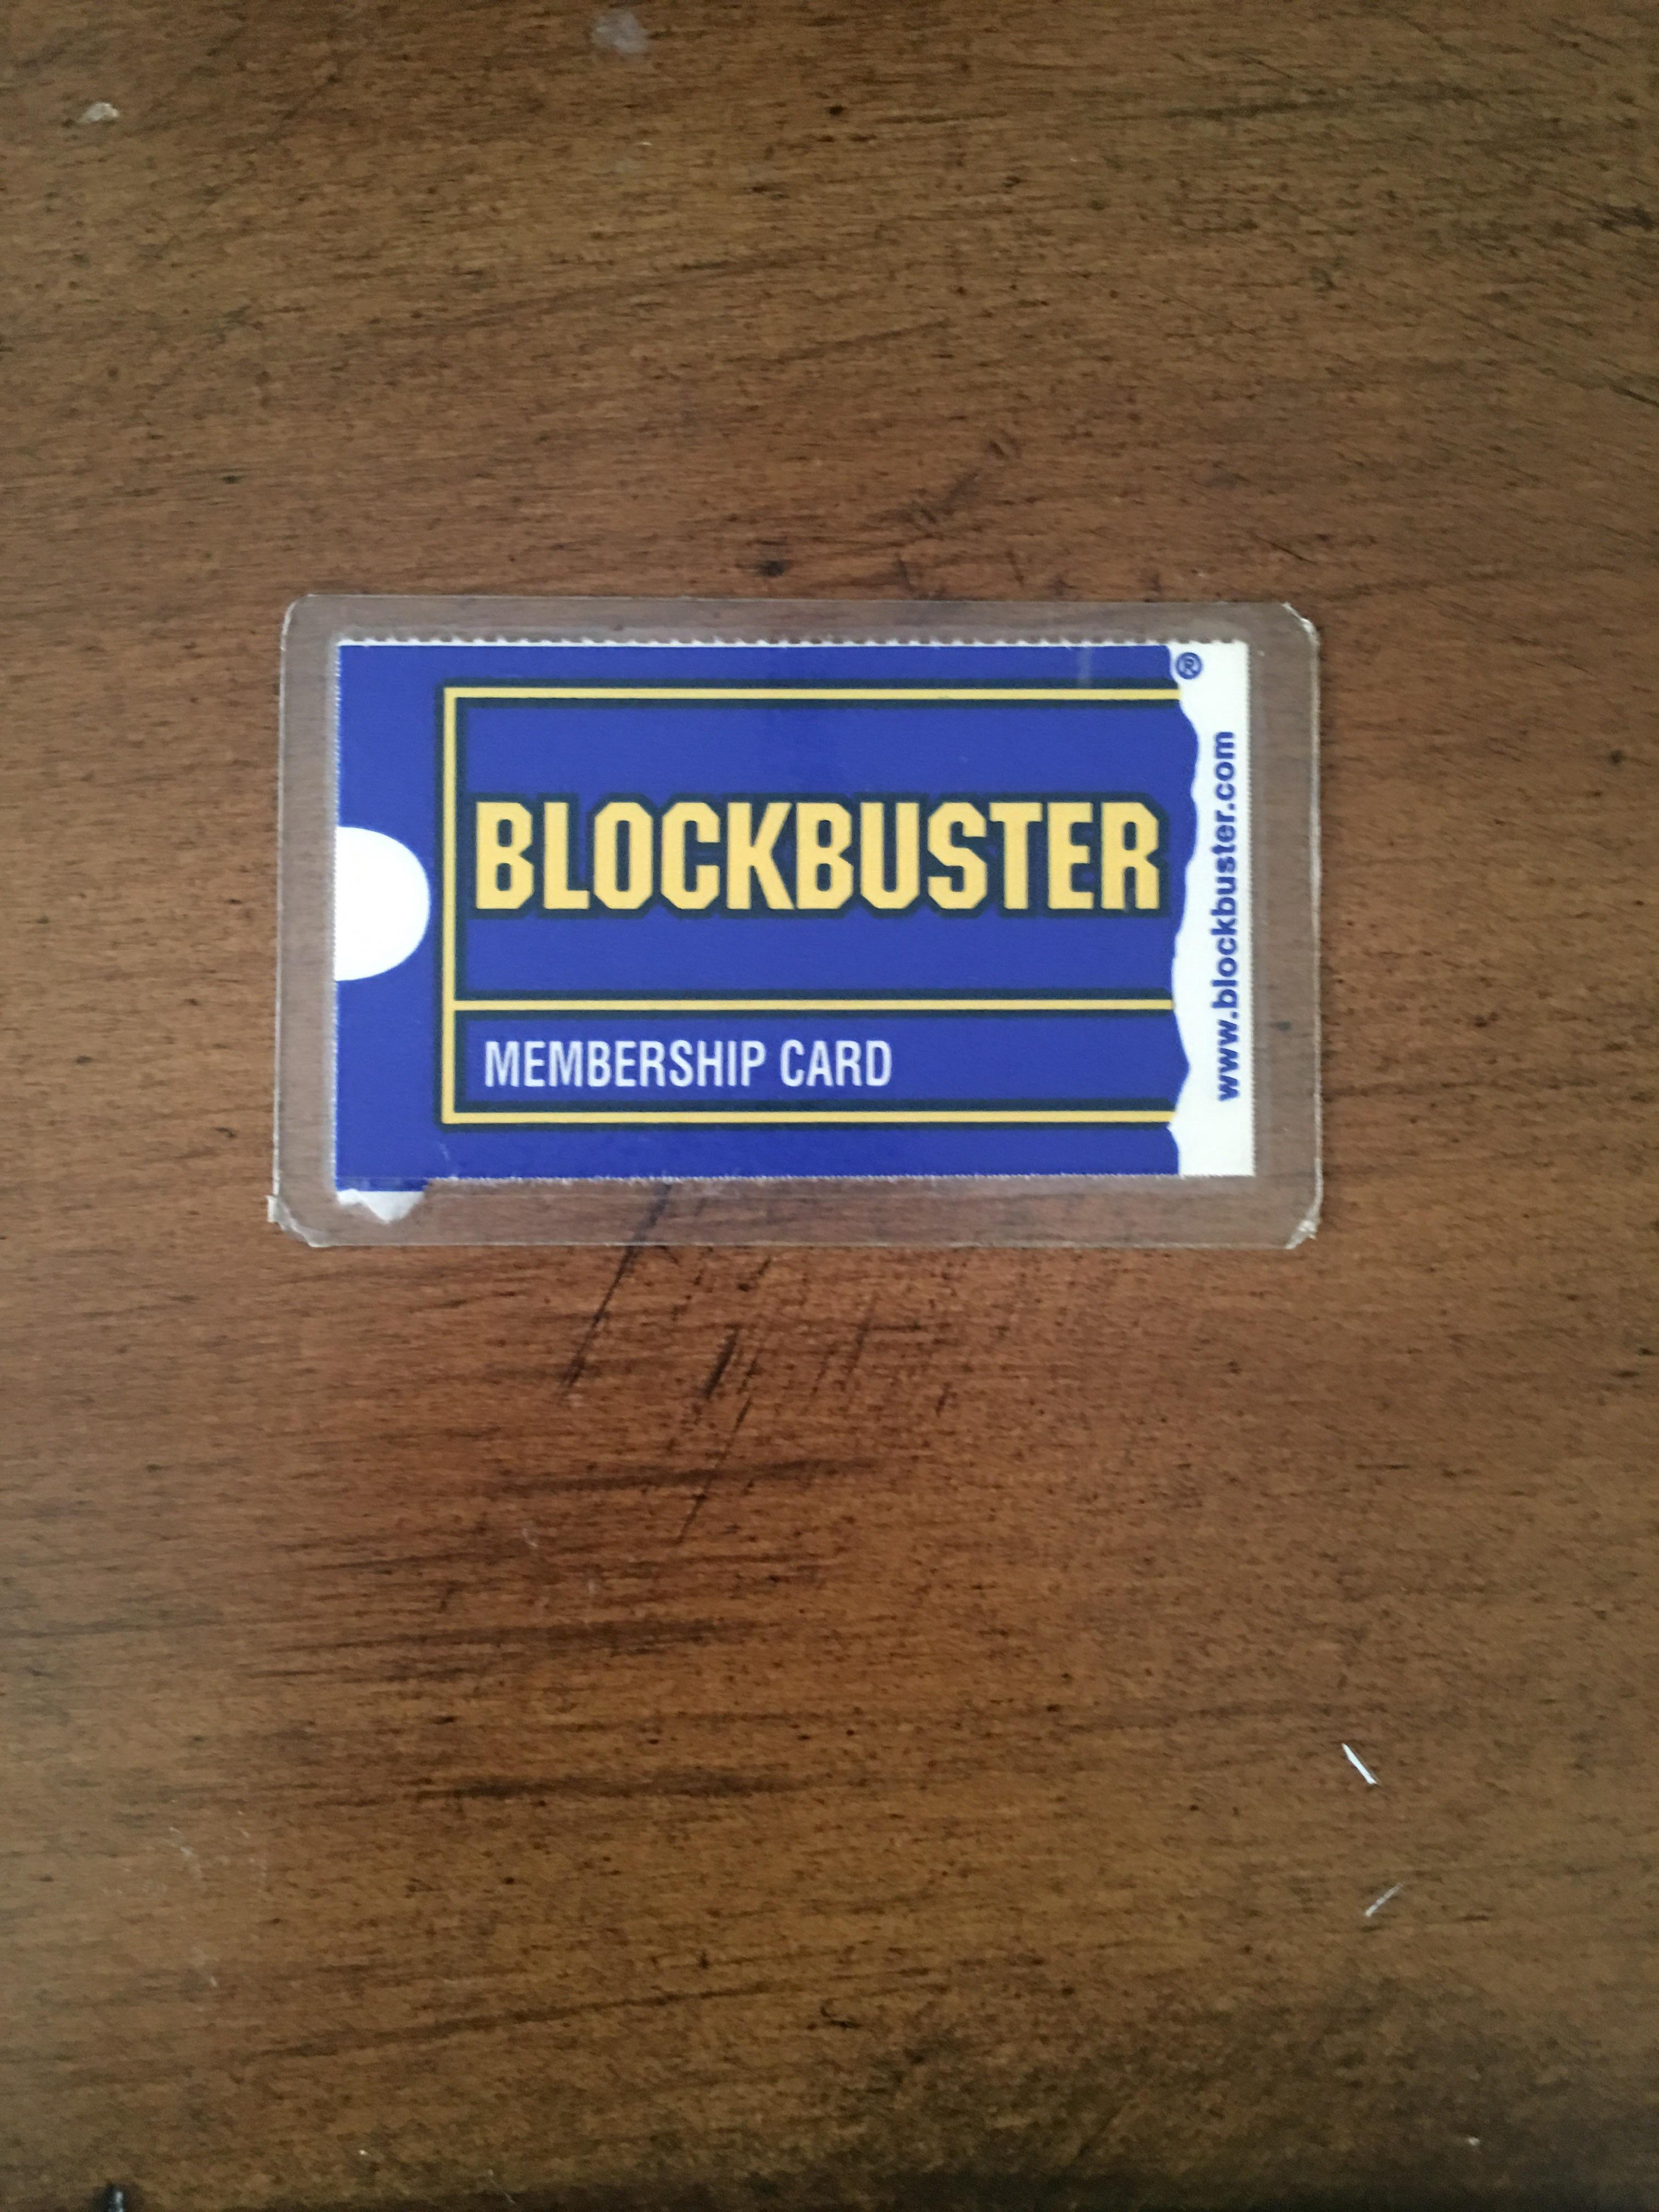 Old Blockbuster Logo - Found this old Blockbuster card